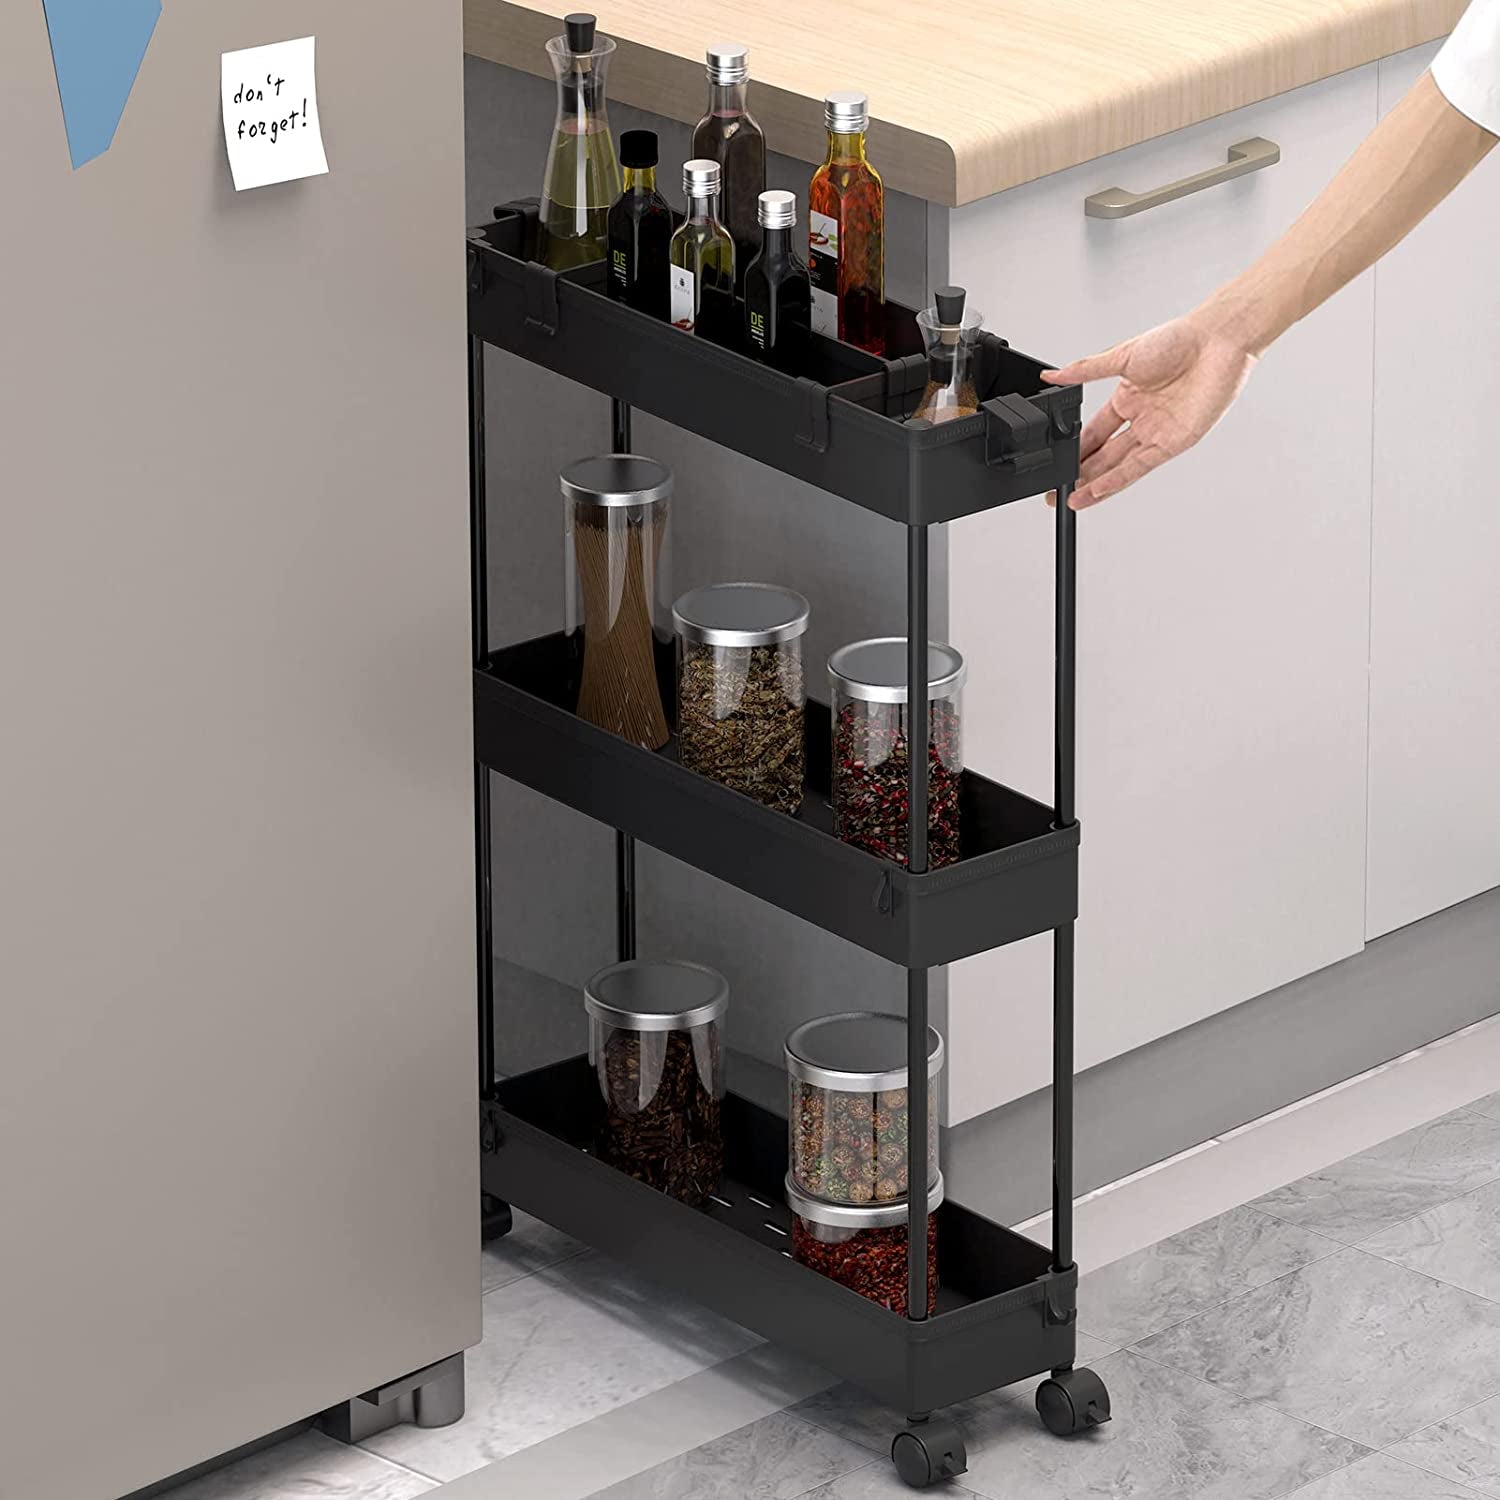 Slim Storage Cart,3 Tier Bathroom Rolling Slide Out Utility Cart, Mobile Shelving Unit Organizer Trolley for Office Bathroom Kitchen Laundry Room Narrow Places, Black